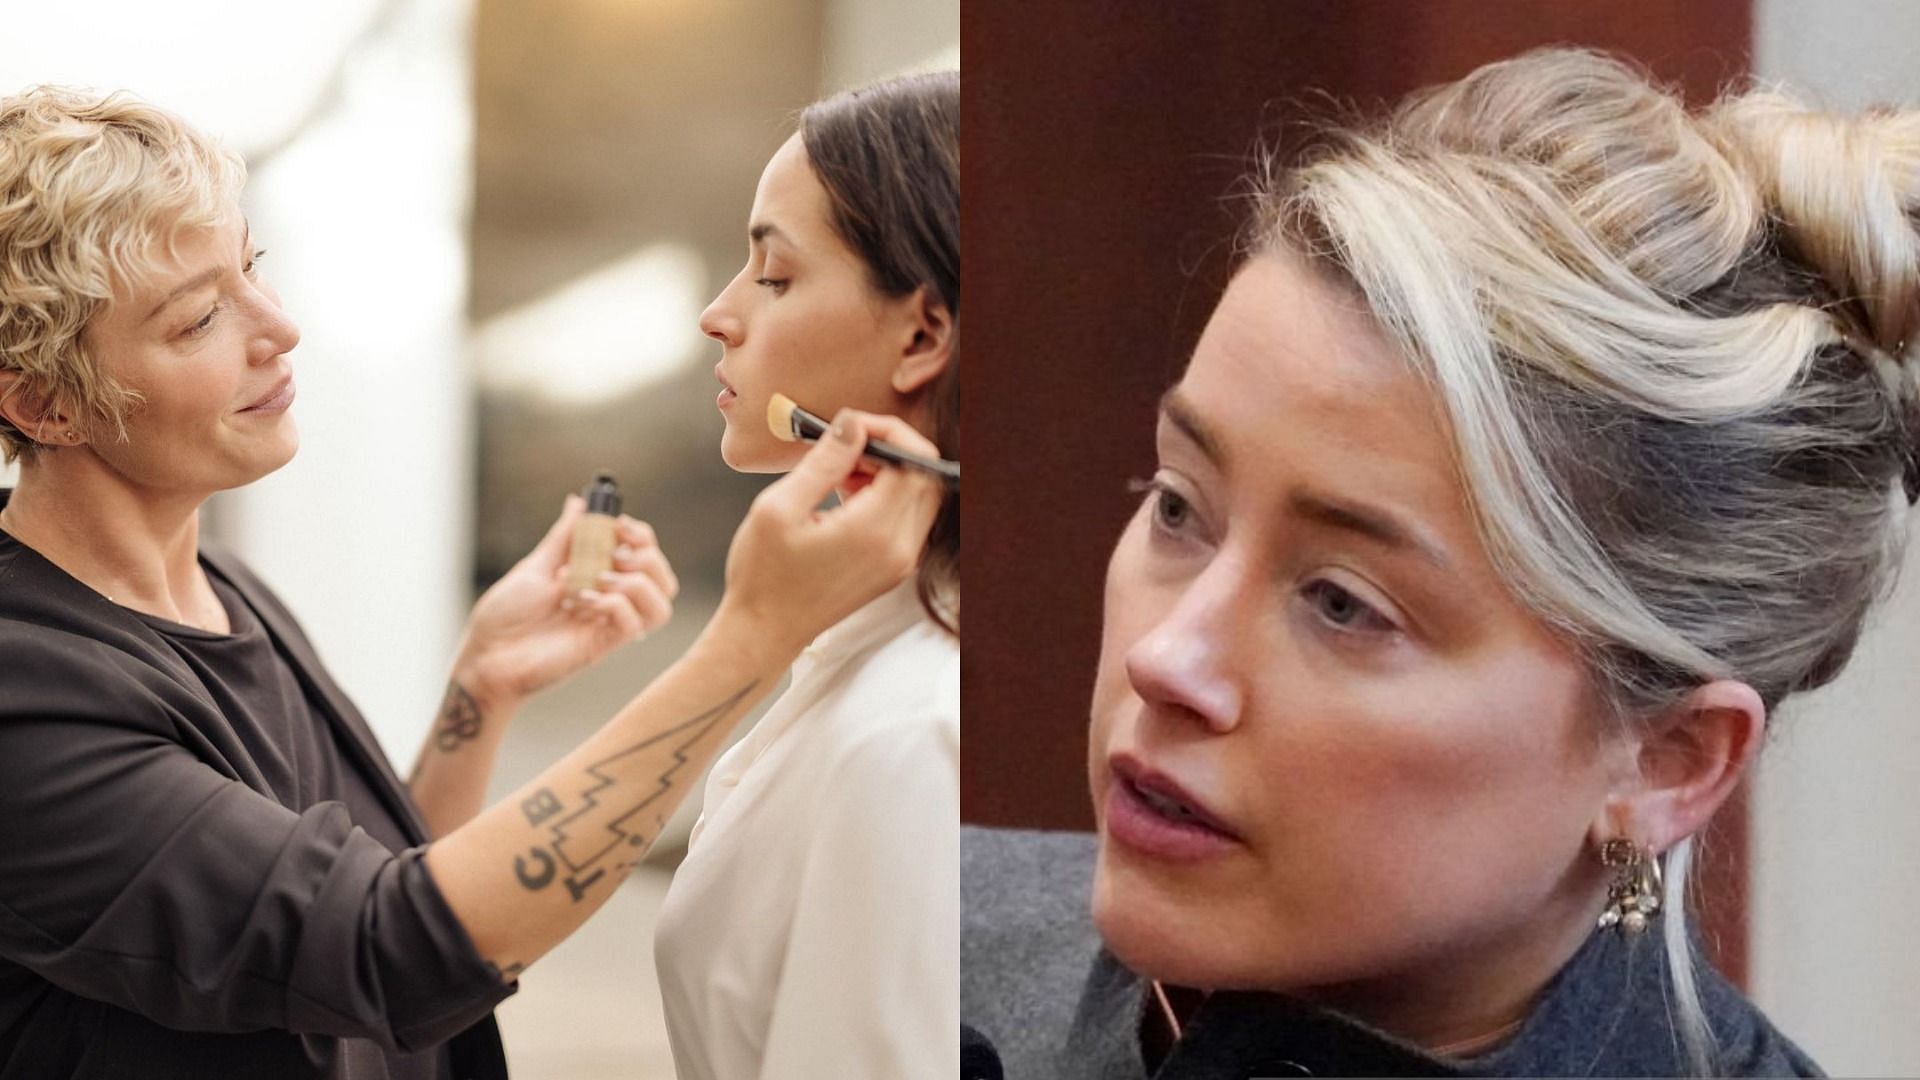 Amber Heard&rsquo;s former makeup artist Melanie Inglessis testified in her ongoing defamation trial with Johnny Depp (Image via Melanie Inglessis/Instagram and Getty Images)